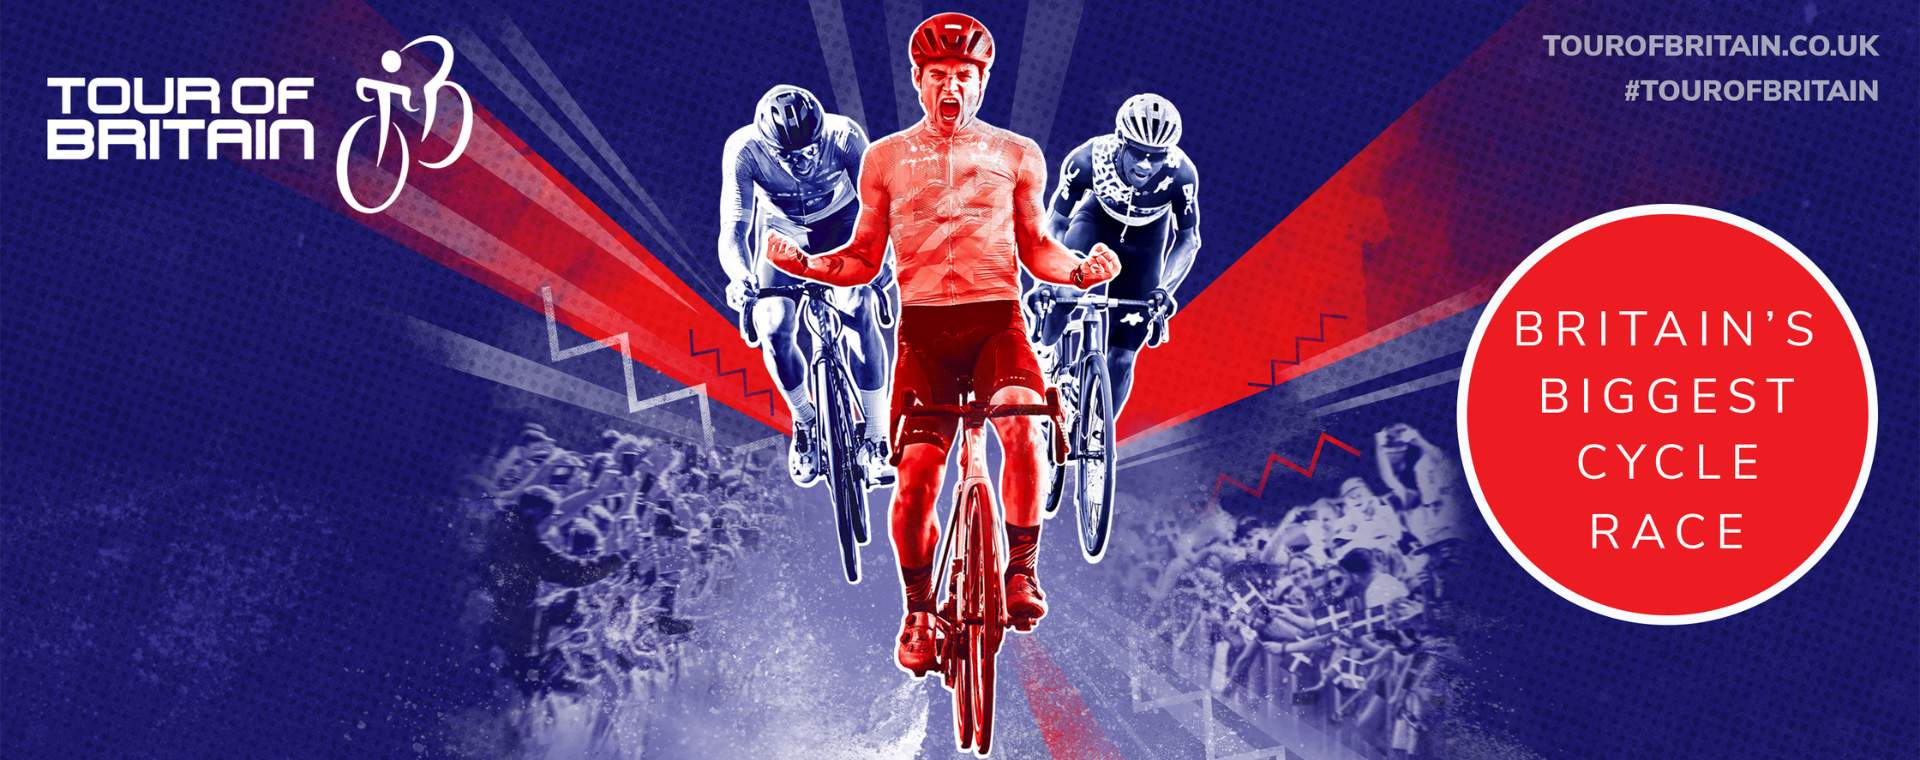 Britain's biggest cycle race, the Tour of Britain arrives in East Yorkshire in September 2023